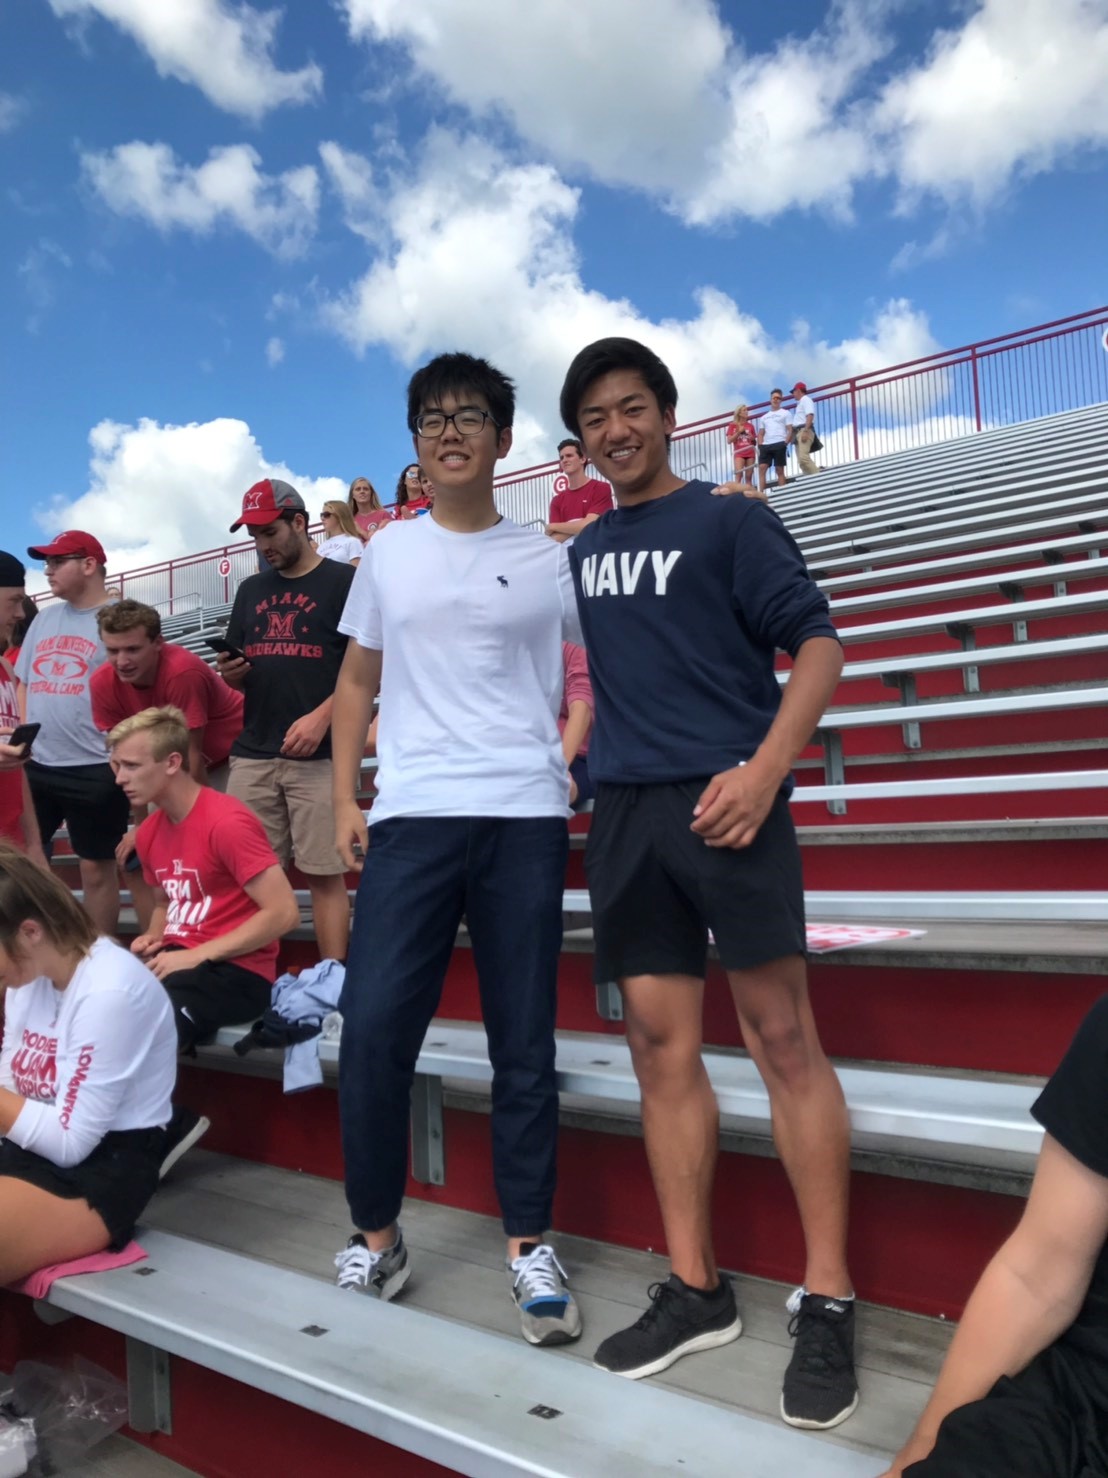 Tenen and a friend standing in the bleachers